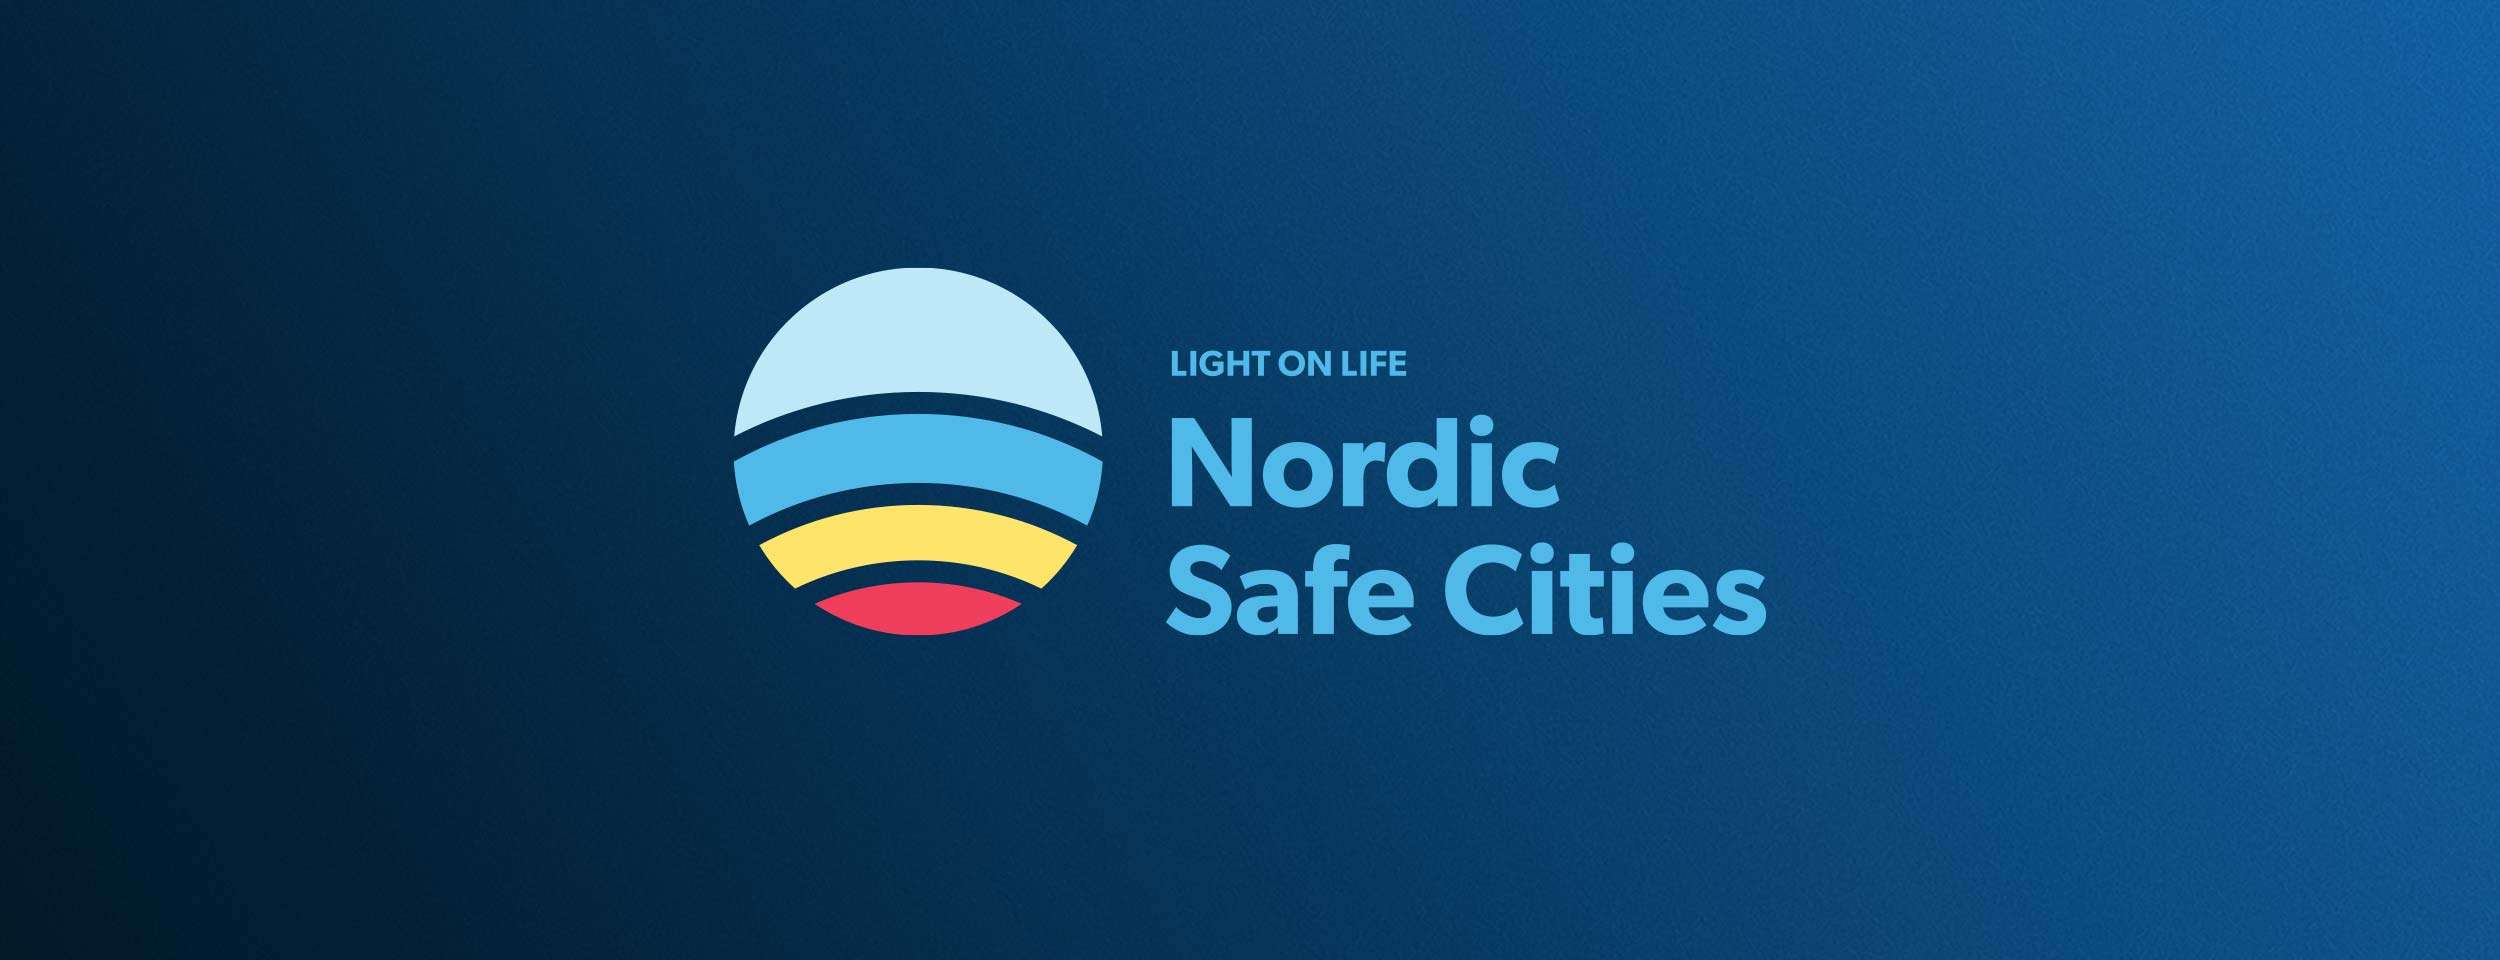 Nordic Safe Cities Logo with payoff